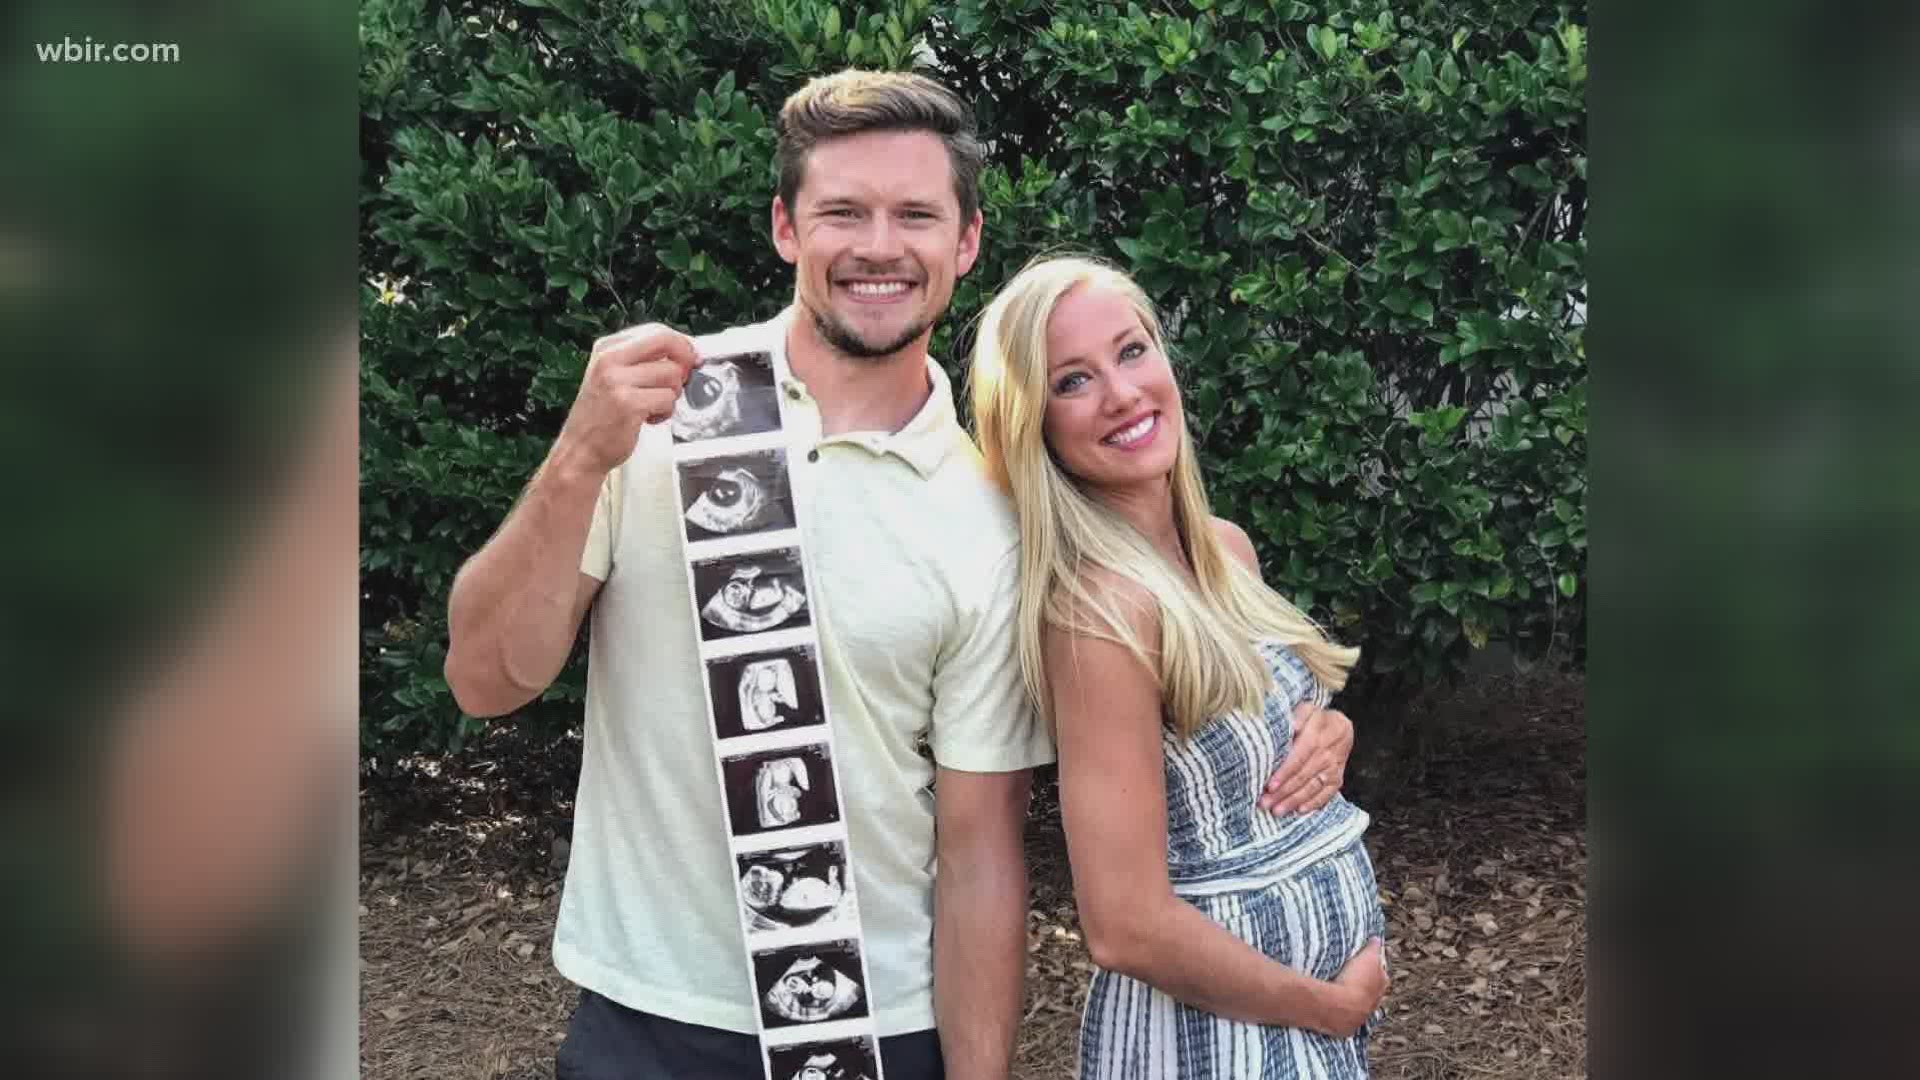 10news Anchor Leslie Ackerson and her family are expecting a baby in early December!